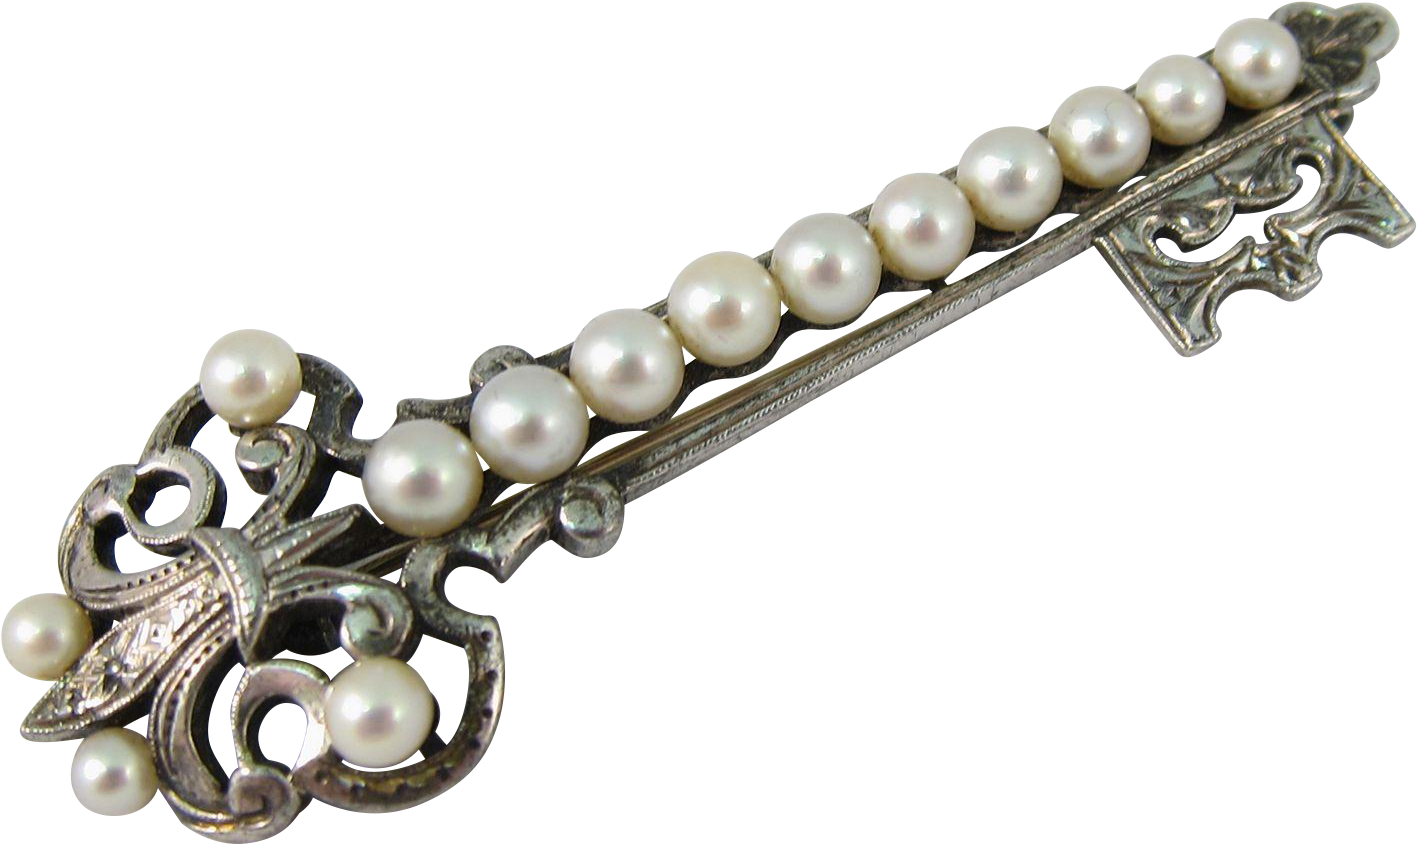 Vintage Sterling Silver Mikimoto Cultured Pearls Key - Vintage Sterling Silver Mikimoto Cultured Pearls Key (1416x1416)